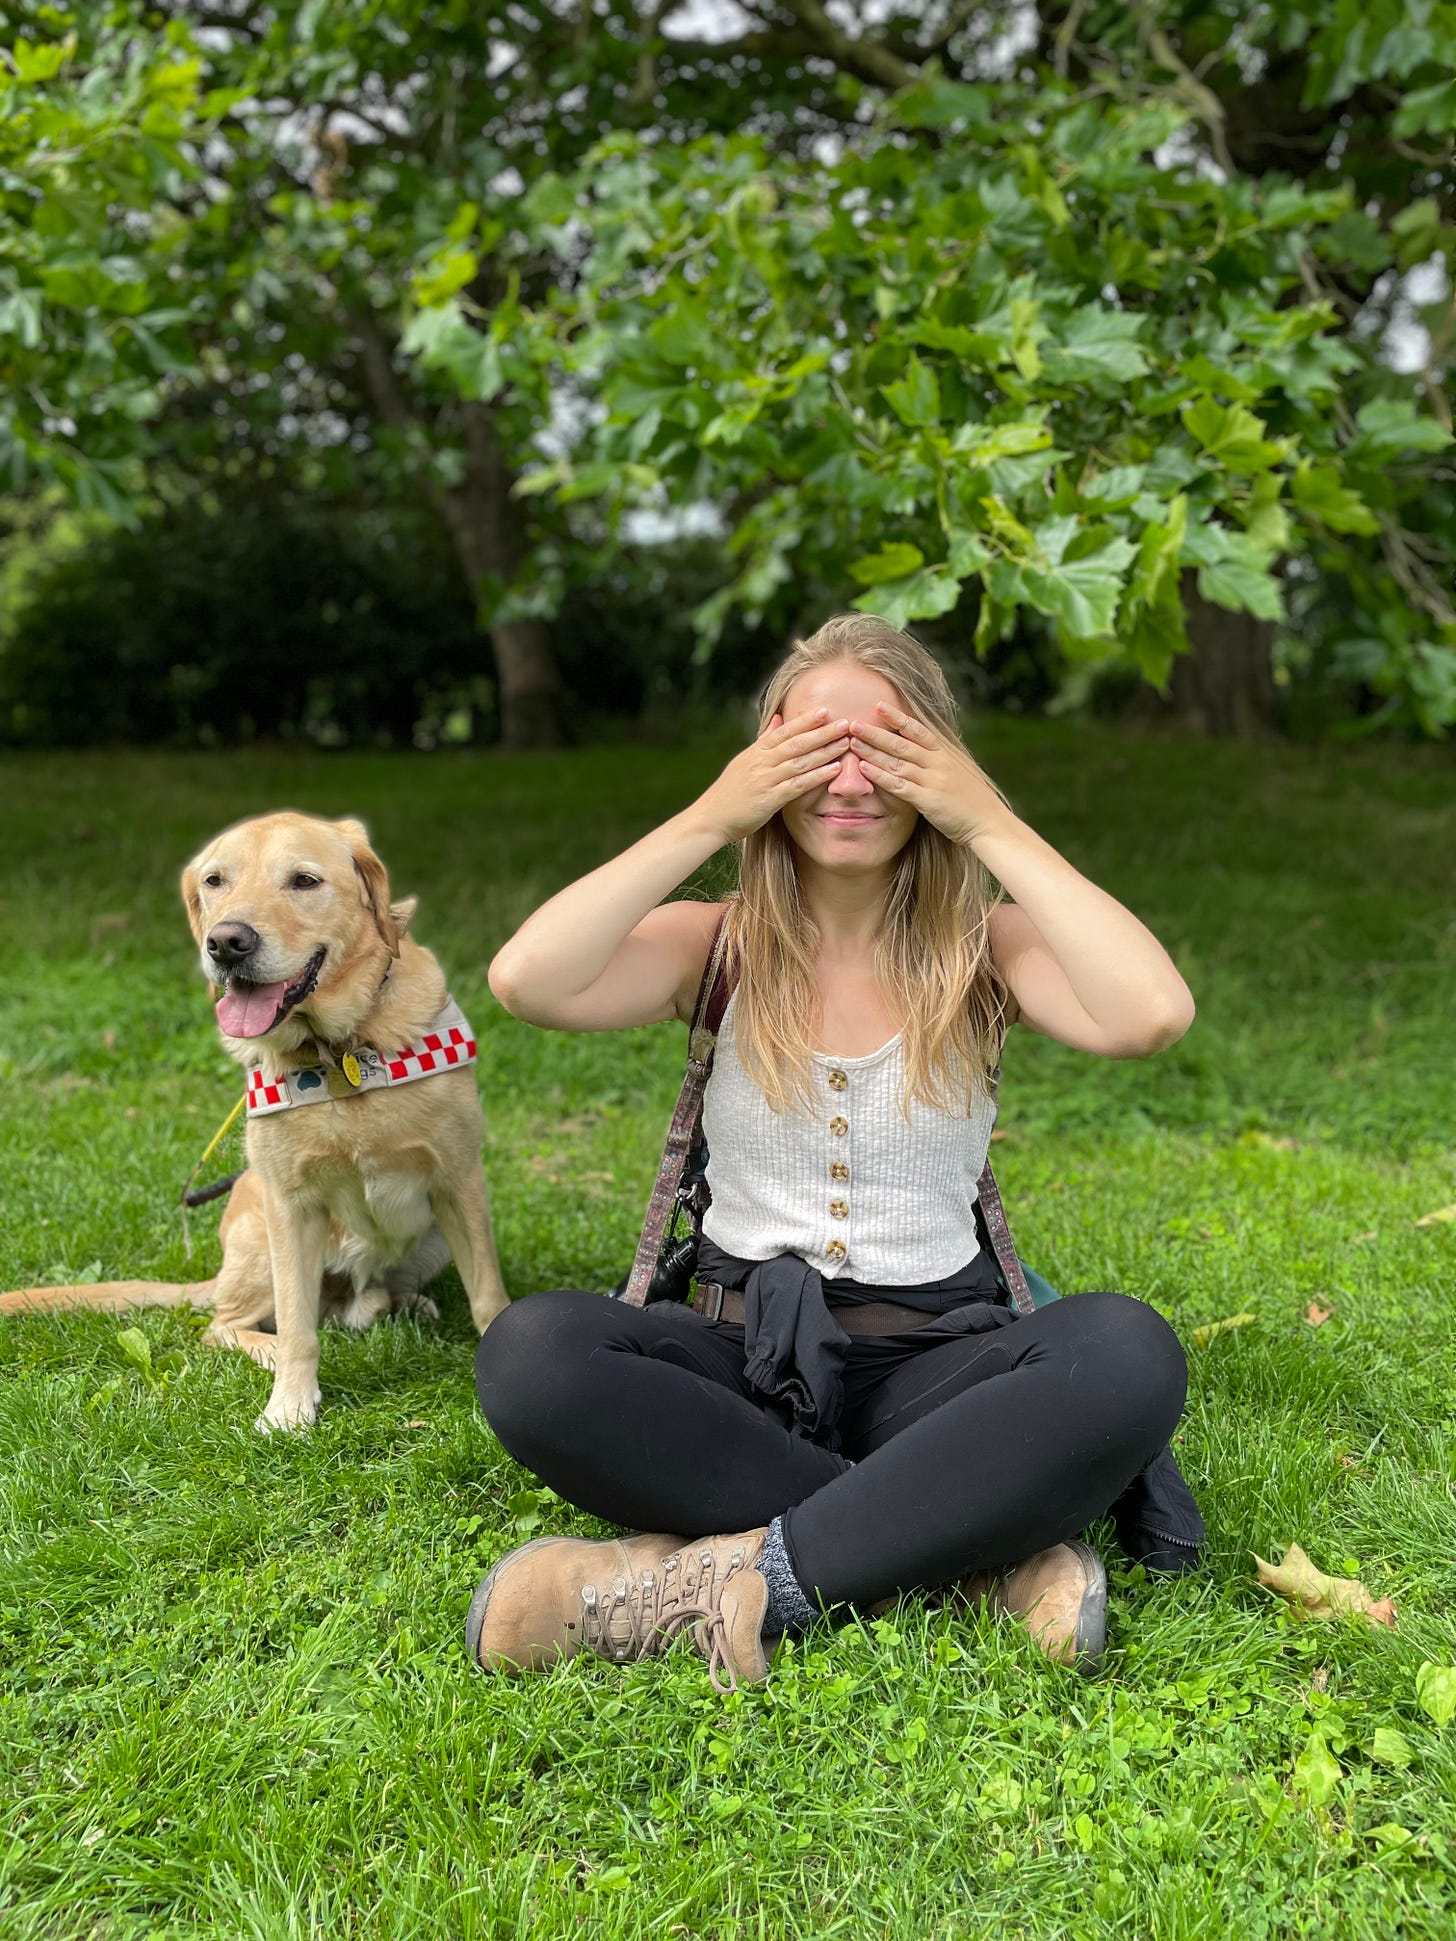 A photo of me and my guide dog sitting on a grass with lots of leaves visible in the background, making the photo look very greenery. My legs are crossed and I am covering my eyes with my hands.